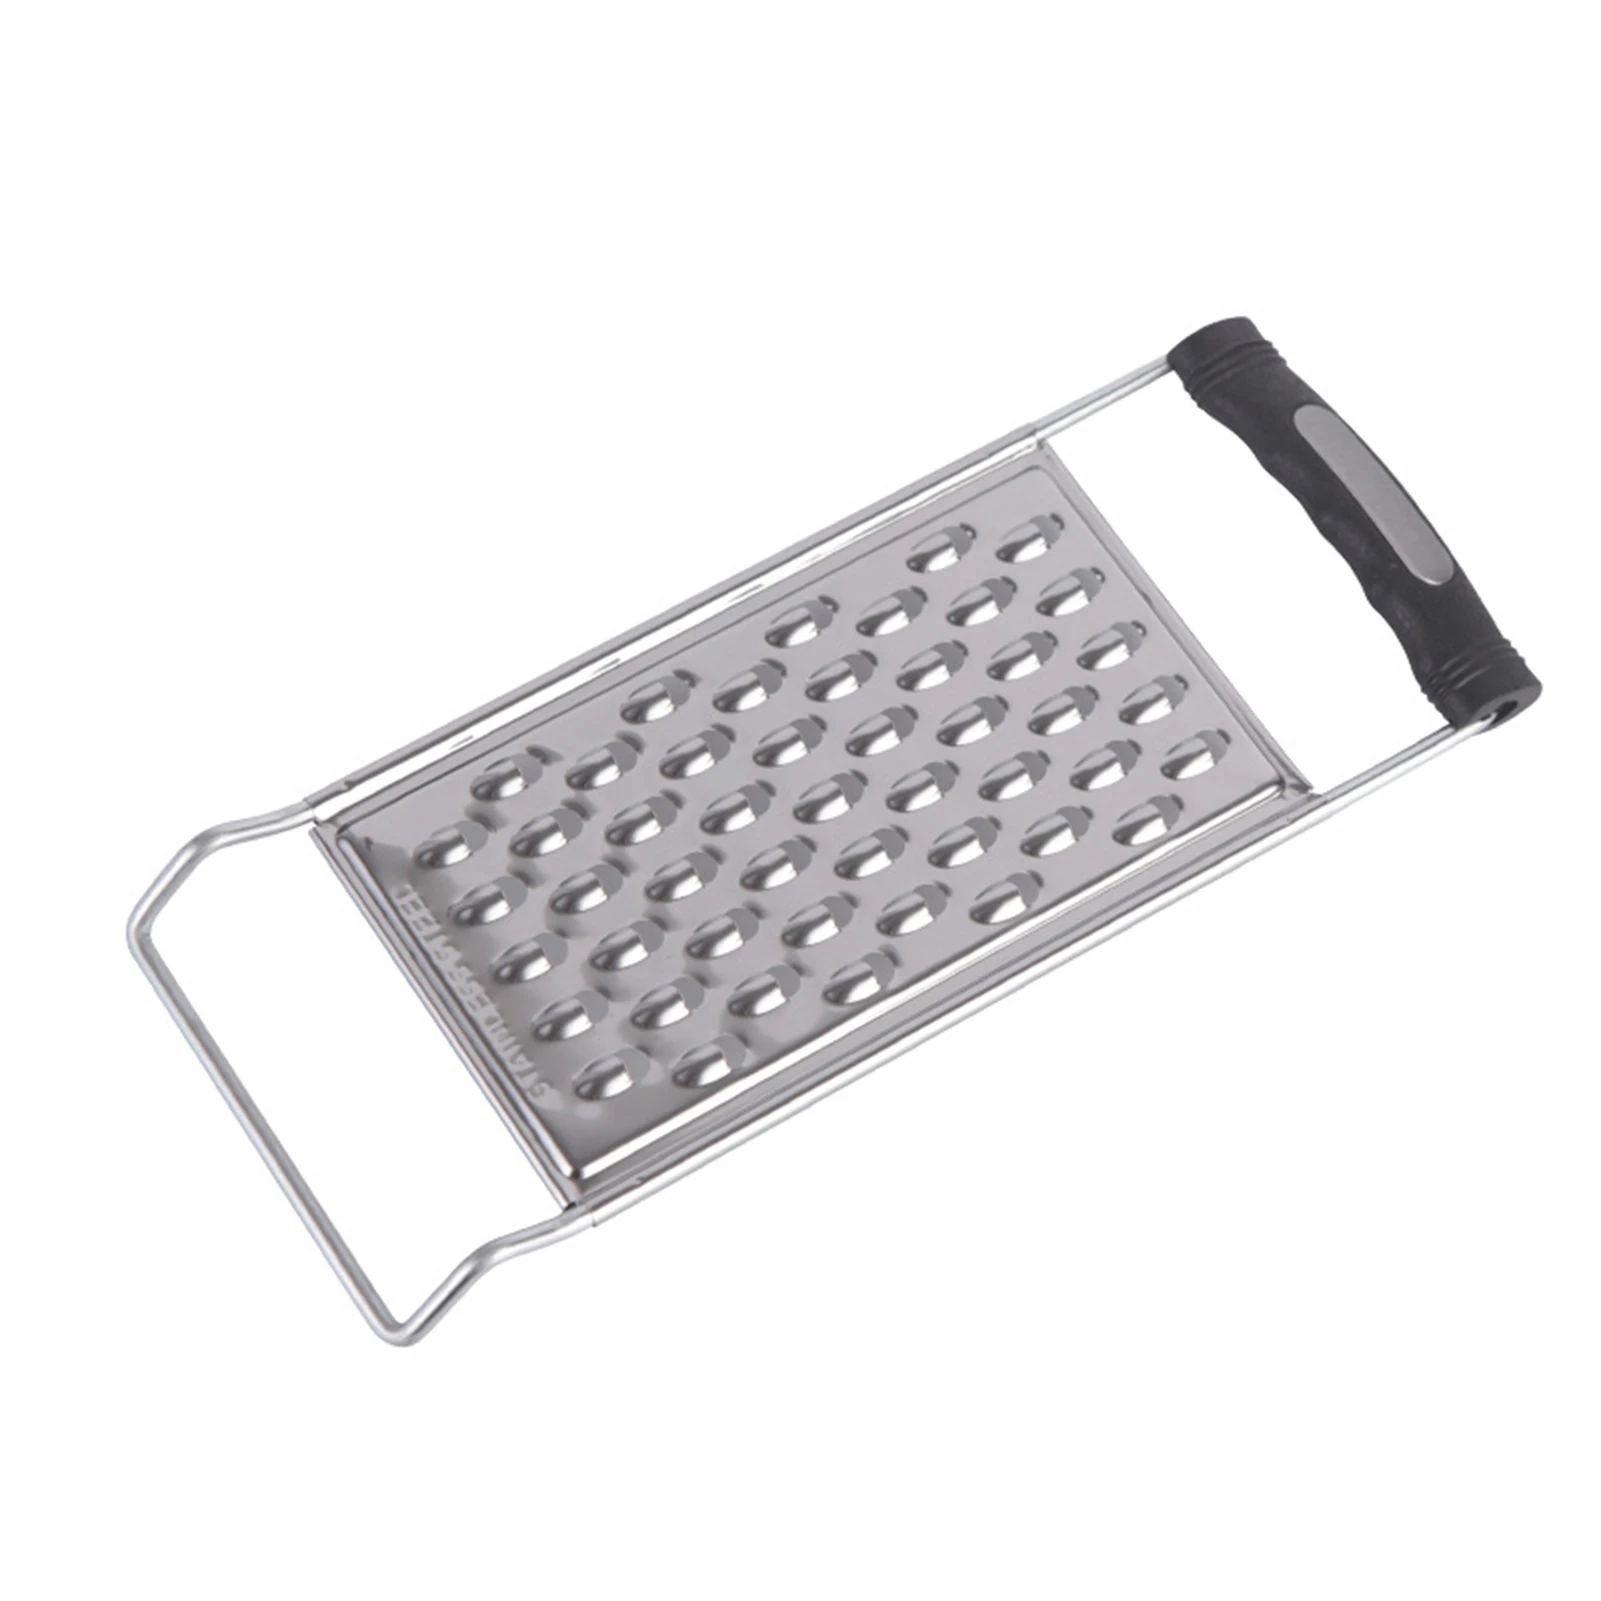 Dropship Large Grater Shaver Stainless Steel Blade With Ergonomic